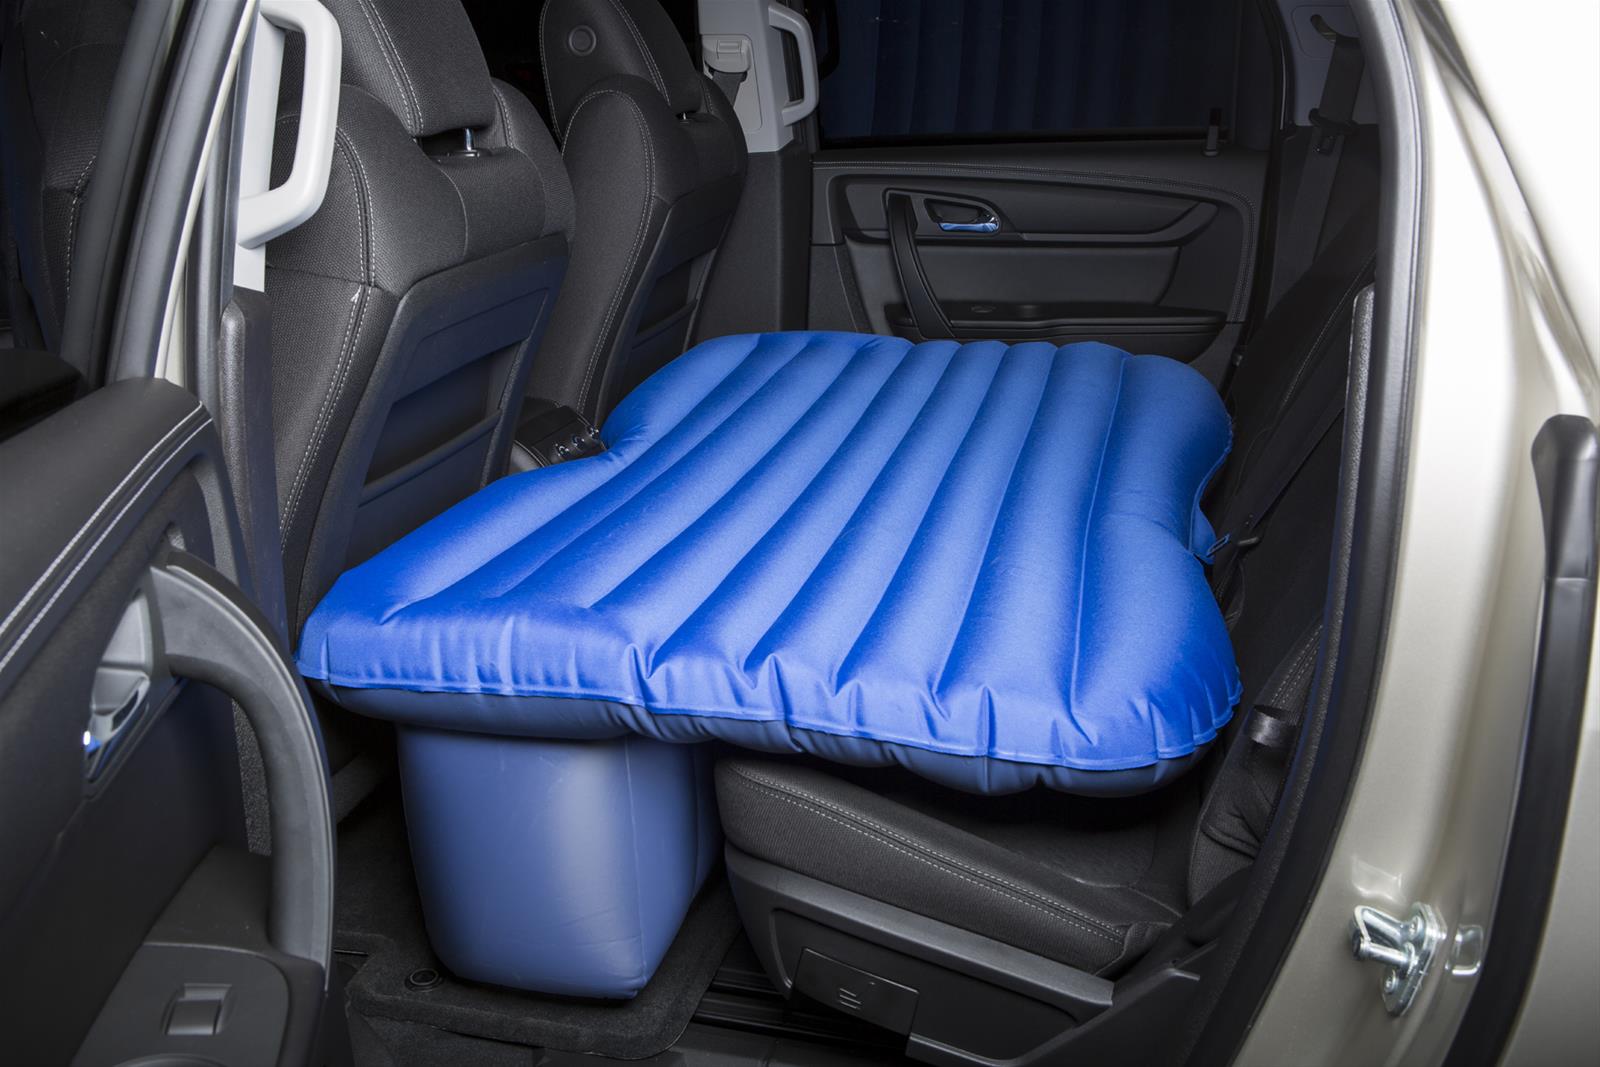 Airbedz Inflatable Rear Seat Air Mattress Mid-Size SUV's & Trucks - Ships Free - Click Image to Close